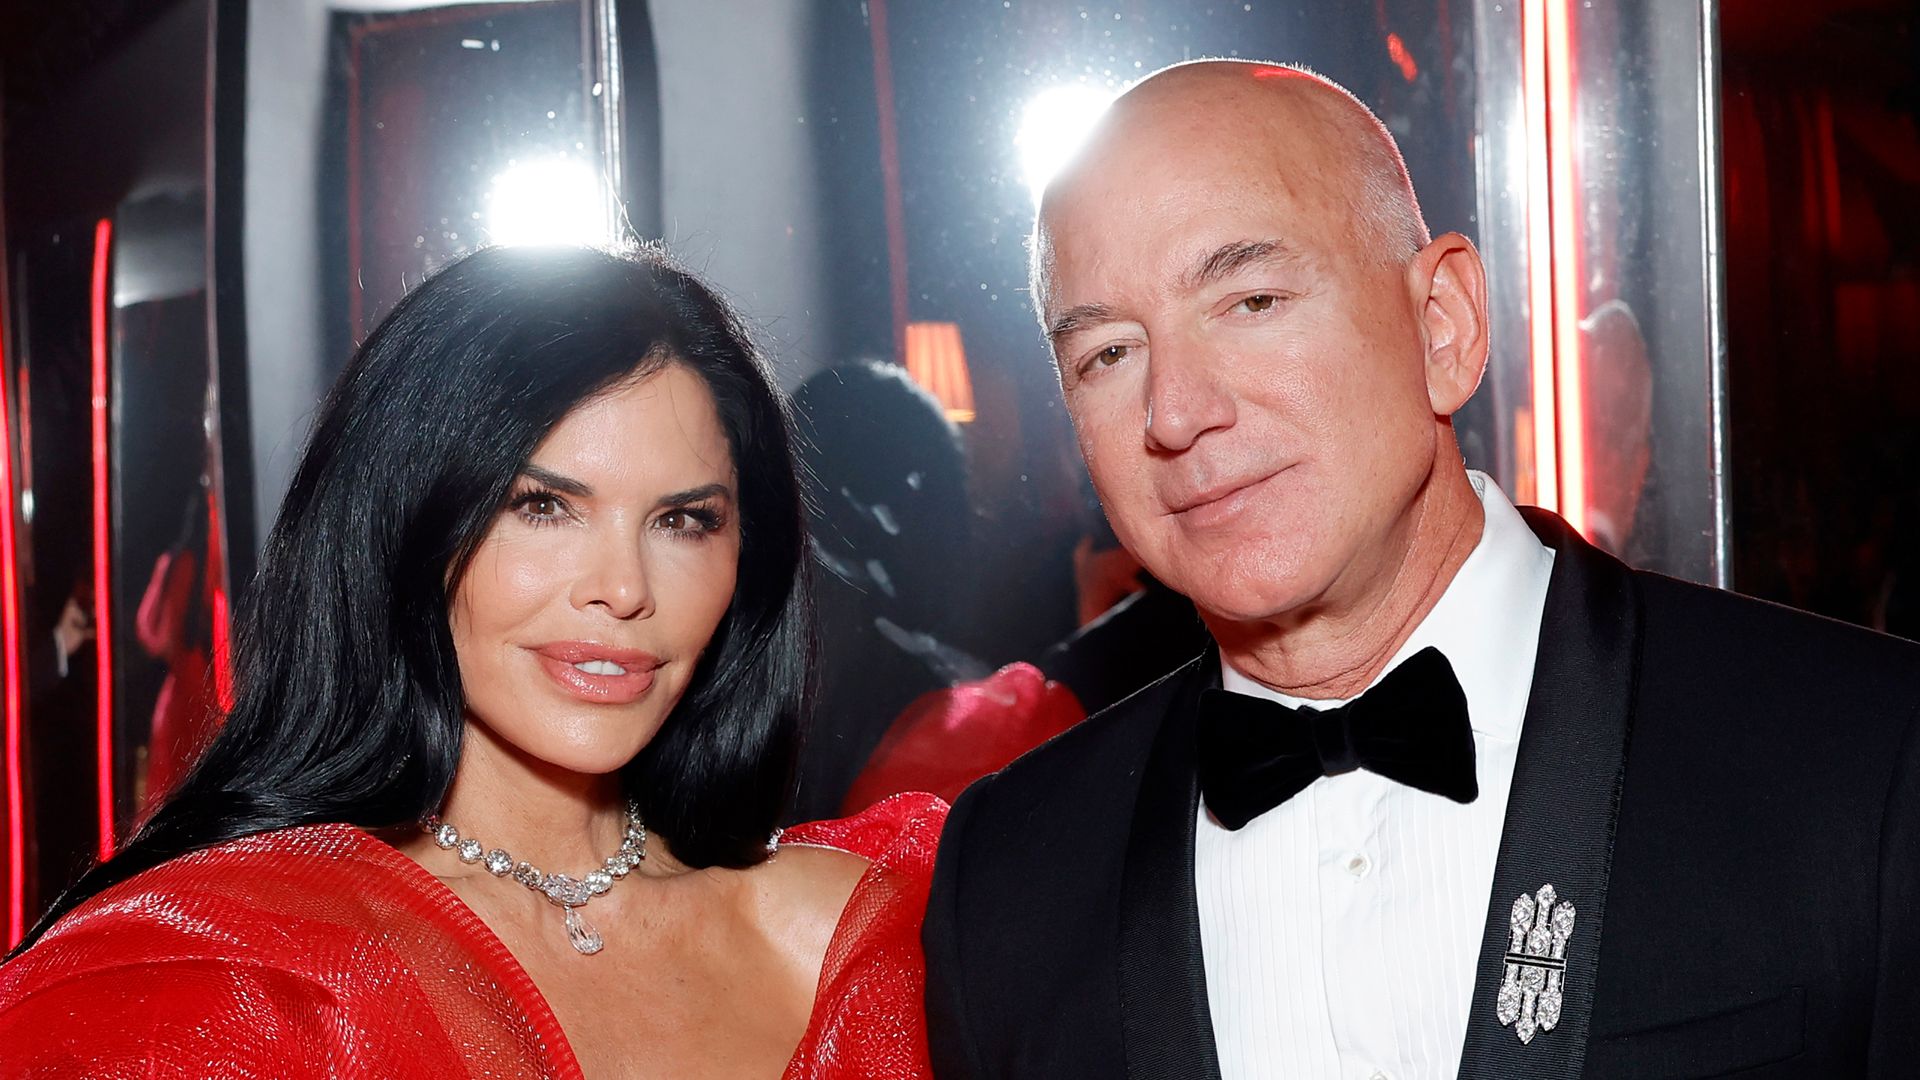 Lauren SÃ¡nchez and Jeff Bezos attend the 2024 Vanity Fair Oscar Party Hosted By Radhika Jones at Wallis Annenberg Center for the Performing Arts on March 10, 2024 in Beverly Hills, California.